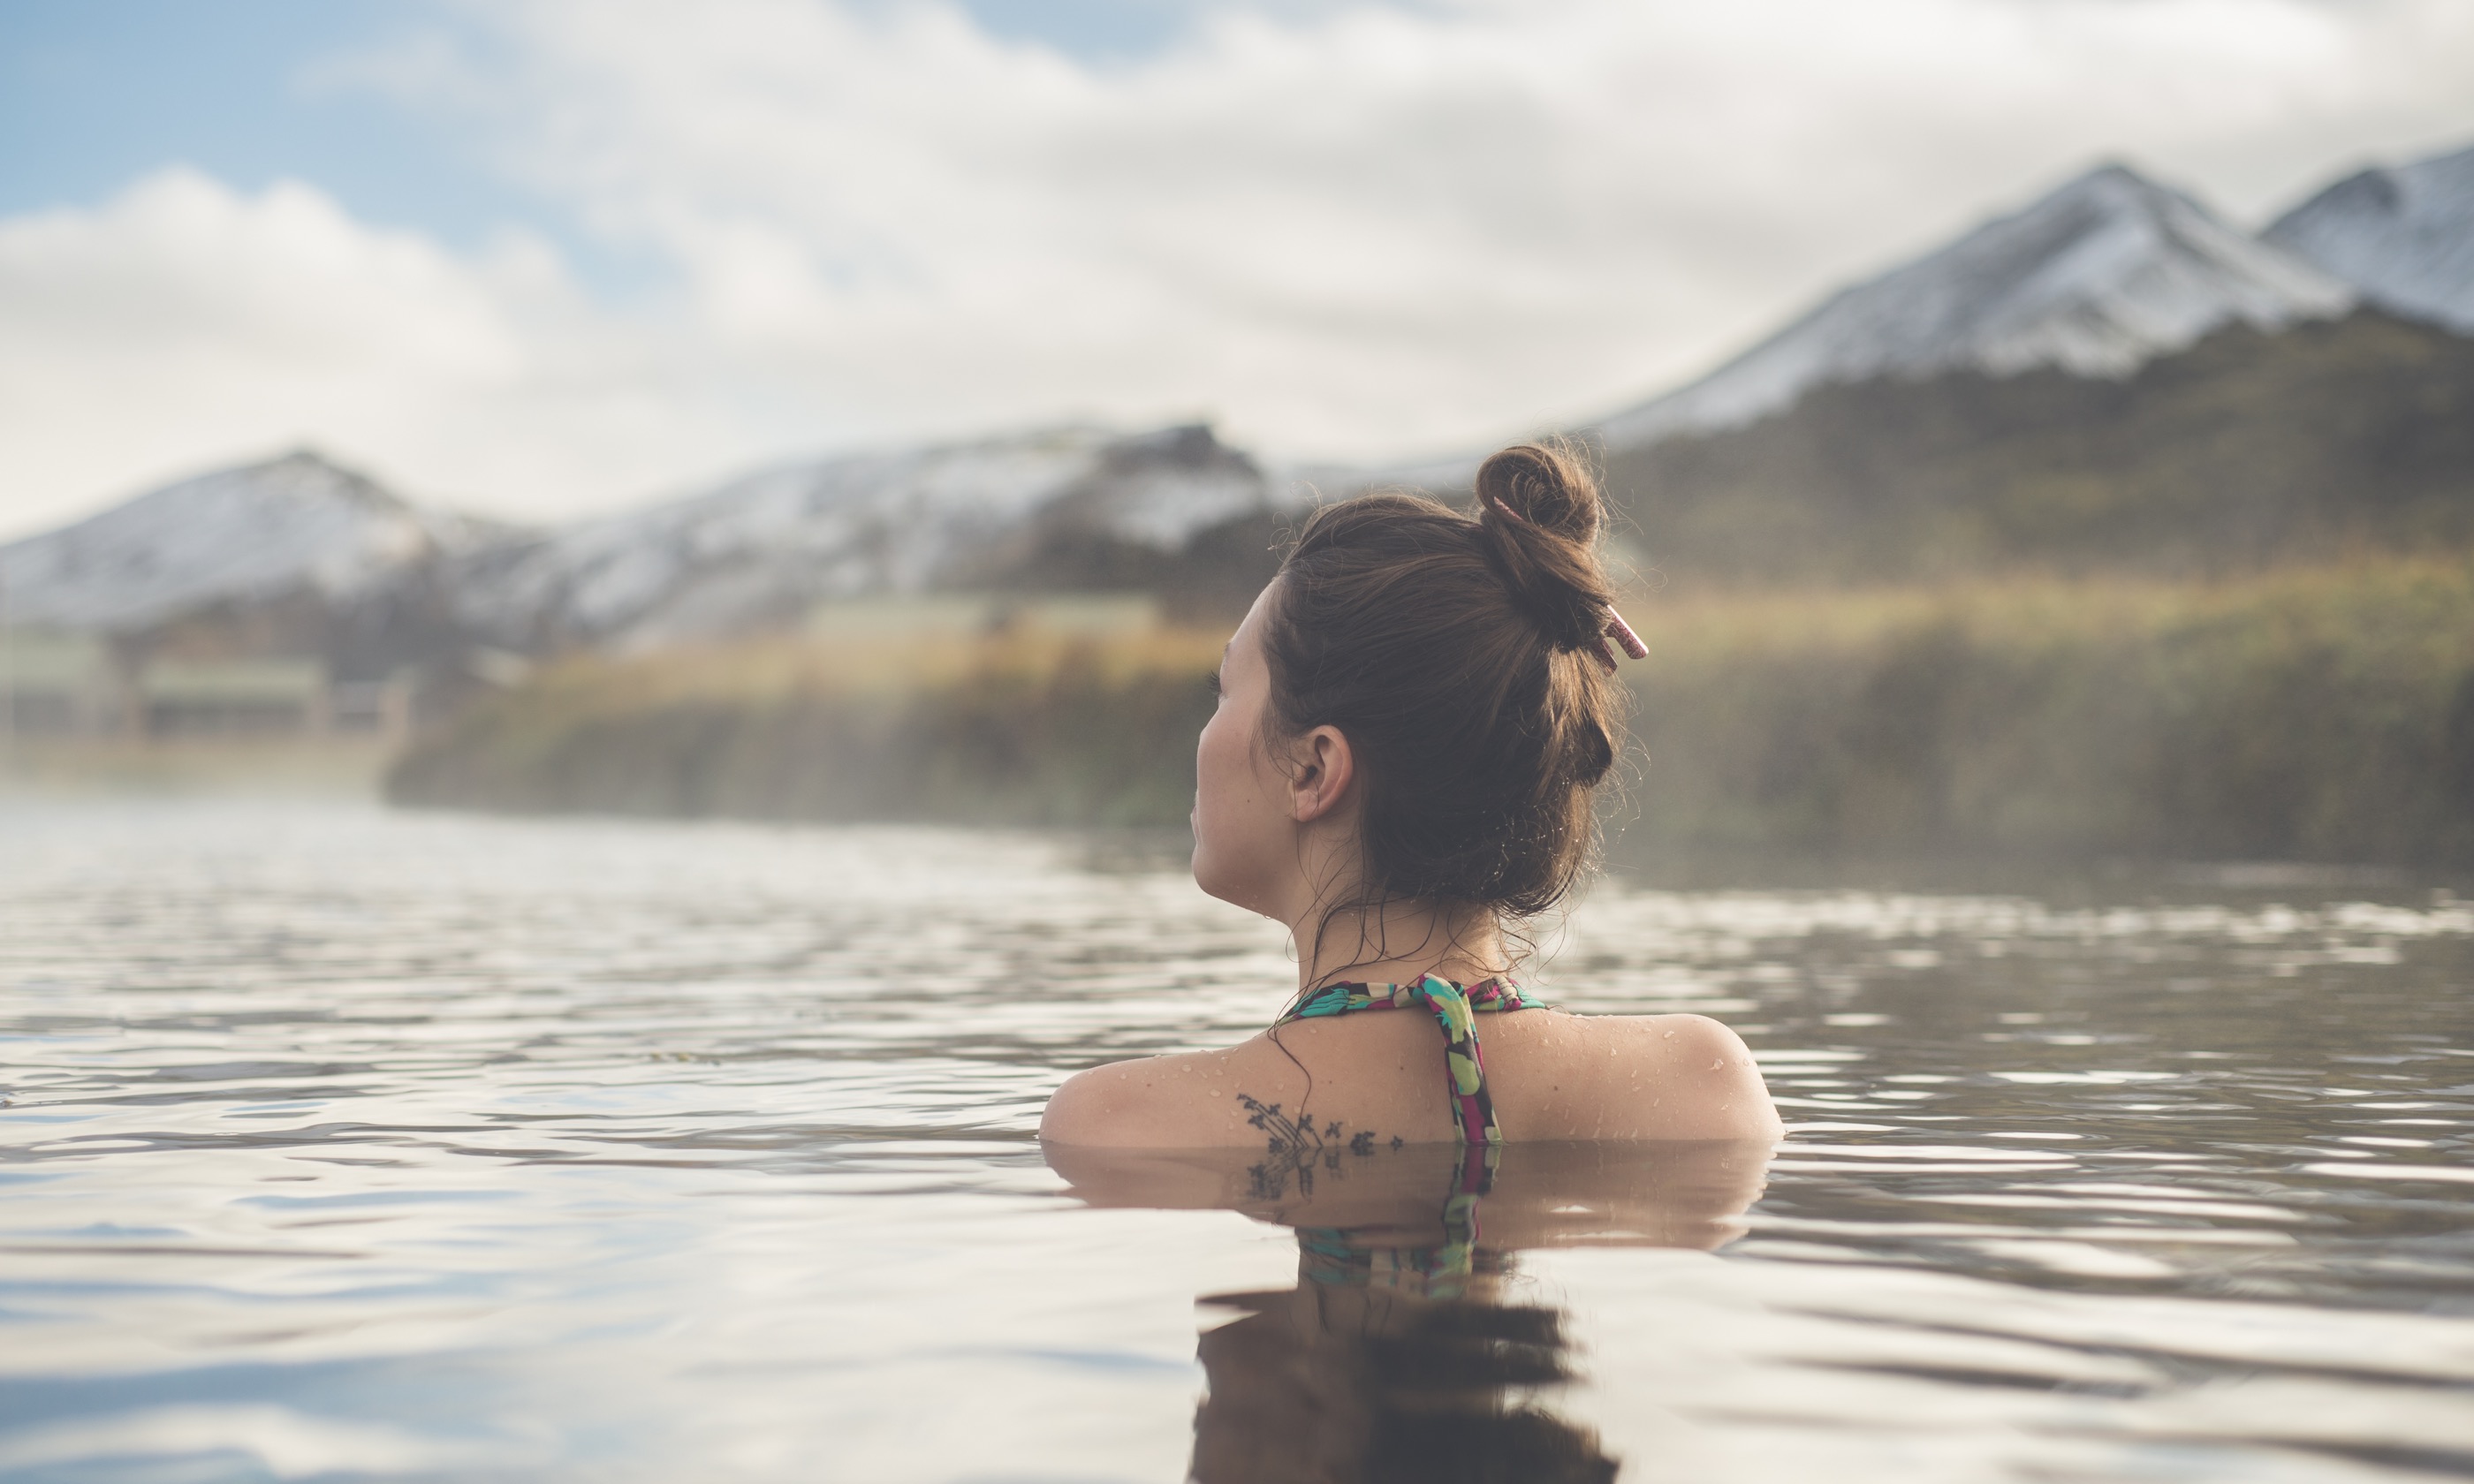 Relaxing in a hoot pool in Iceland (Shutterstock.com)